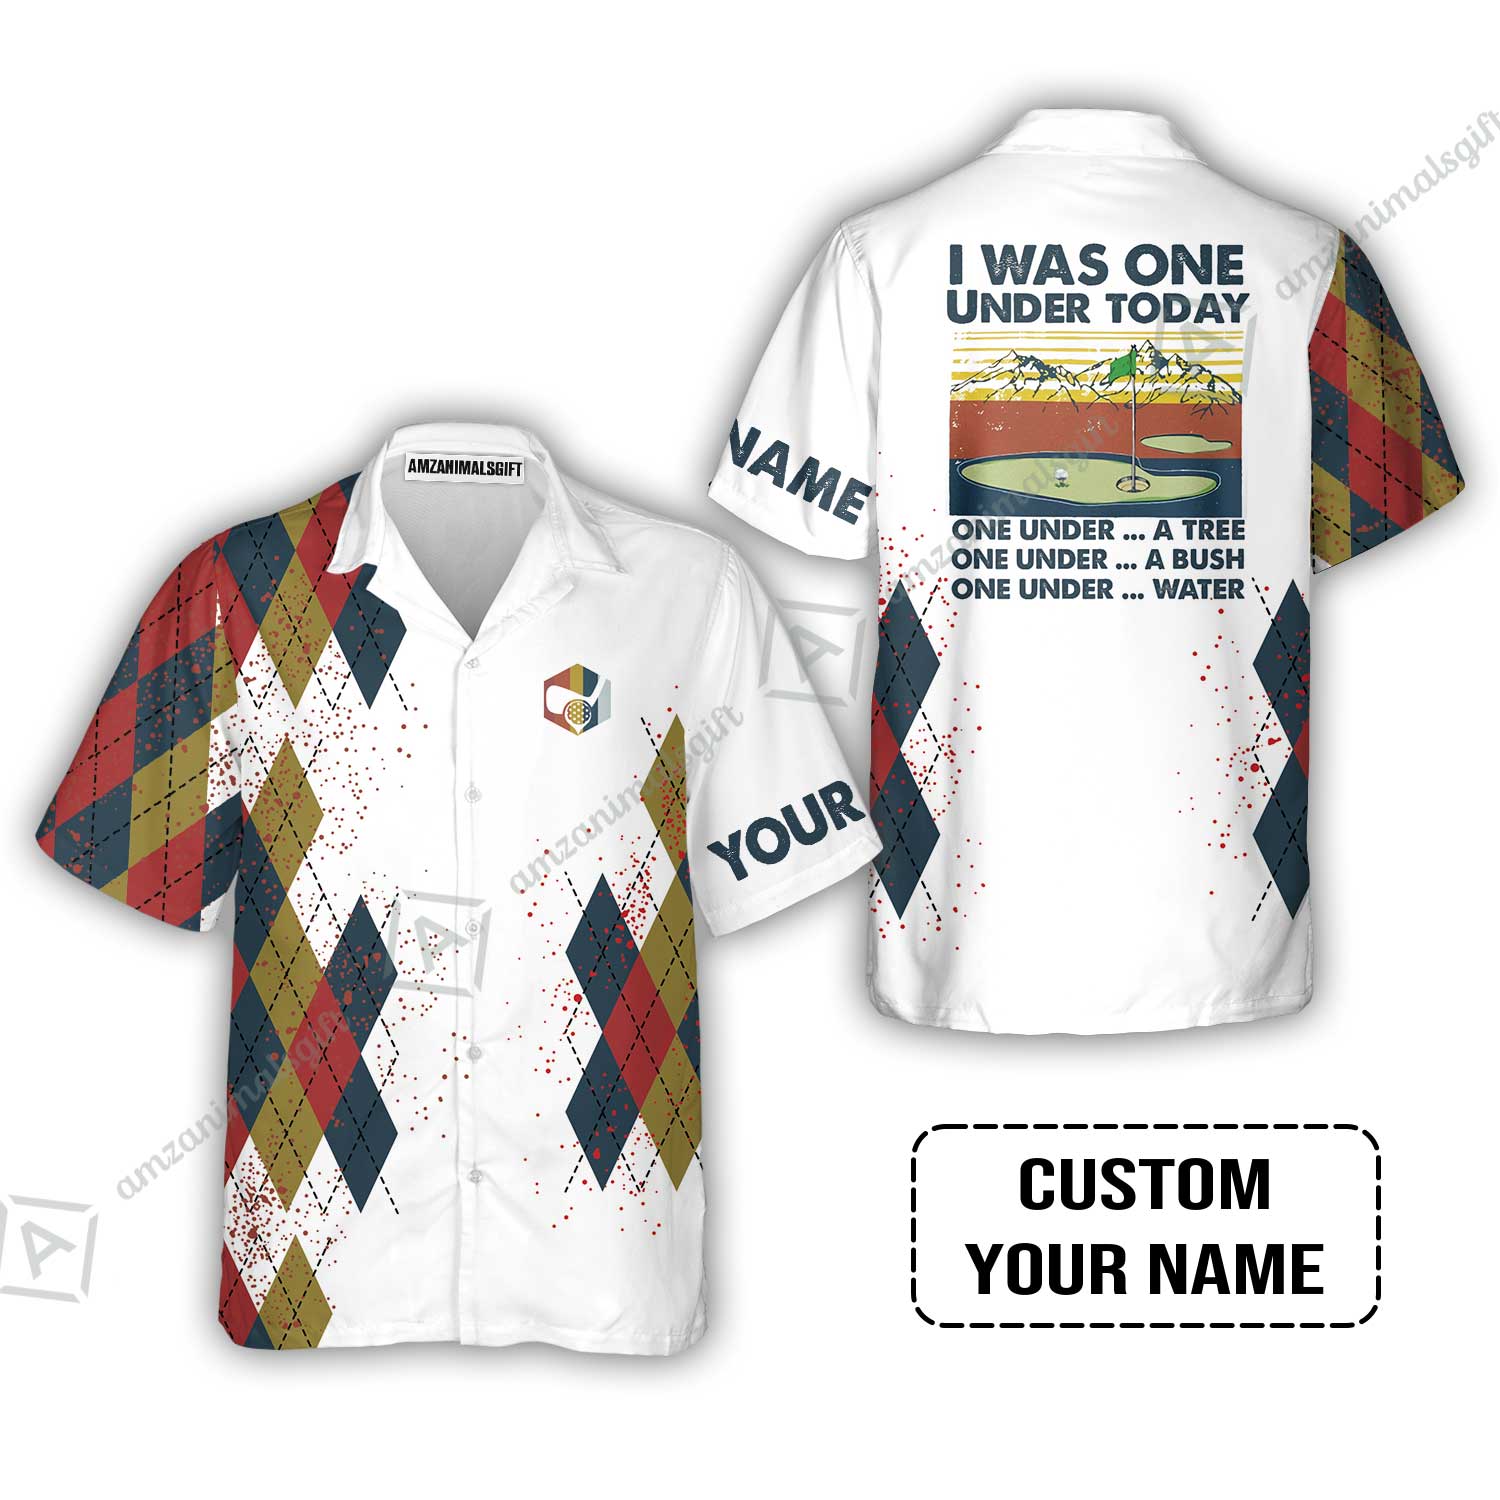 Golf Hawaiian Shirt Custom Name - I Was One Under Today One Under A Tree Bush and Water